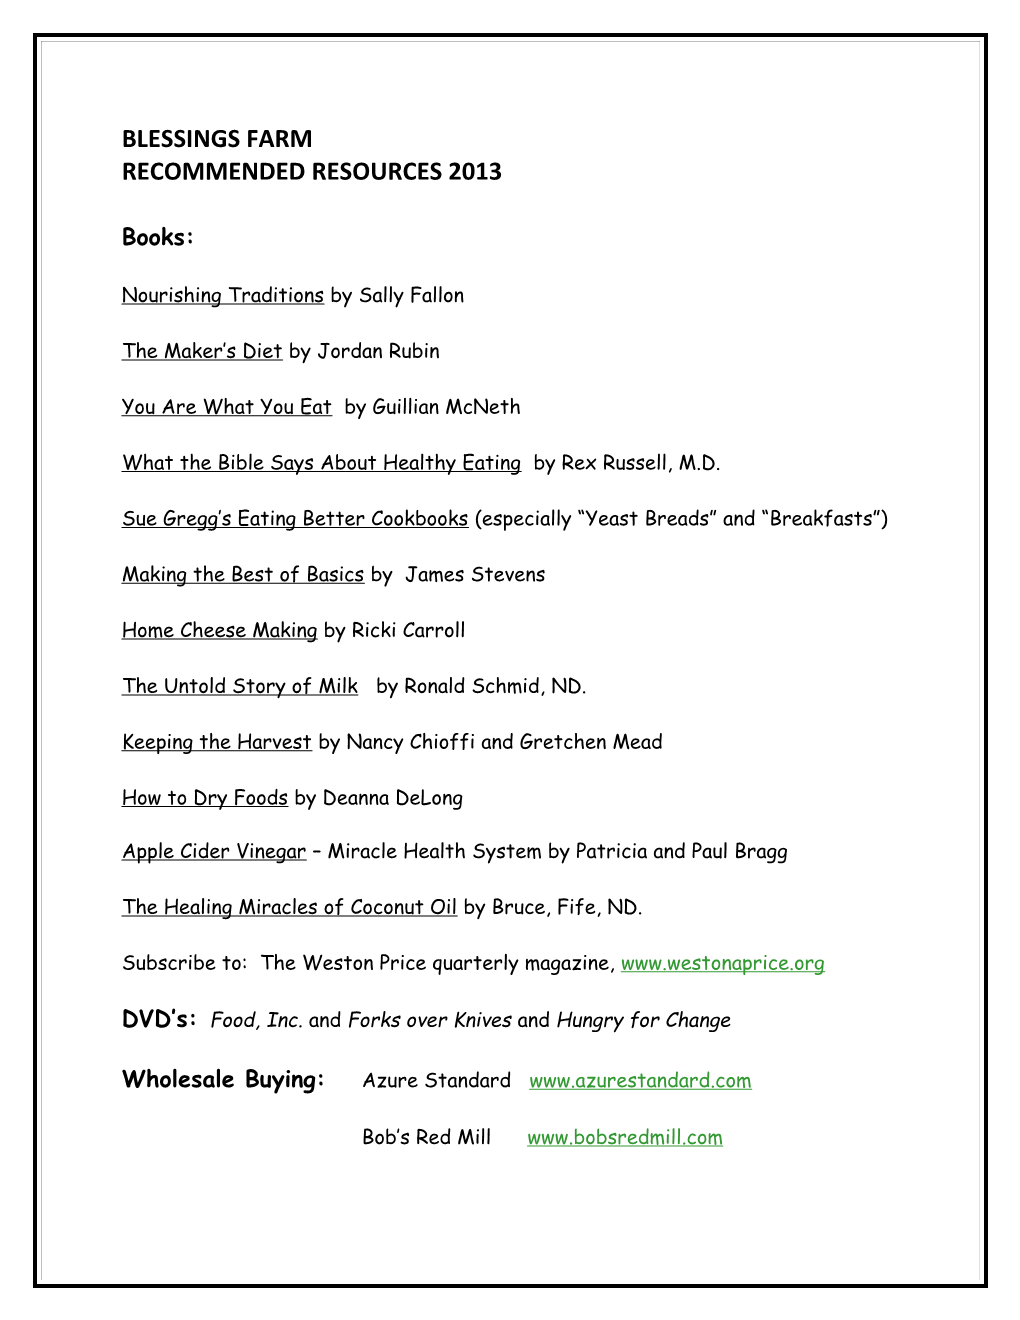 Recommended Resources 2013